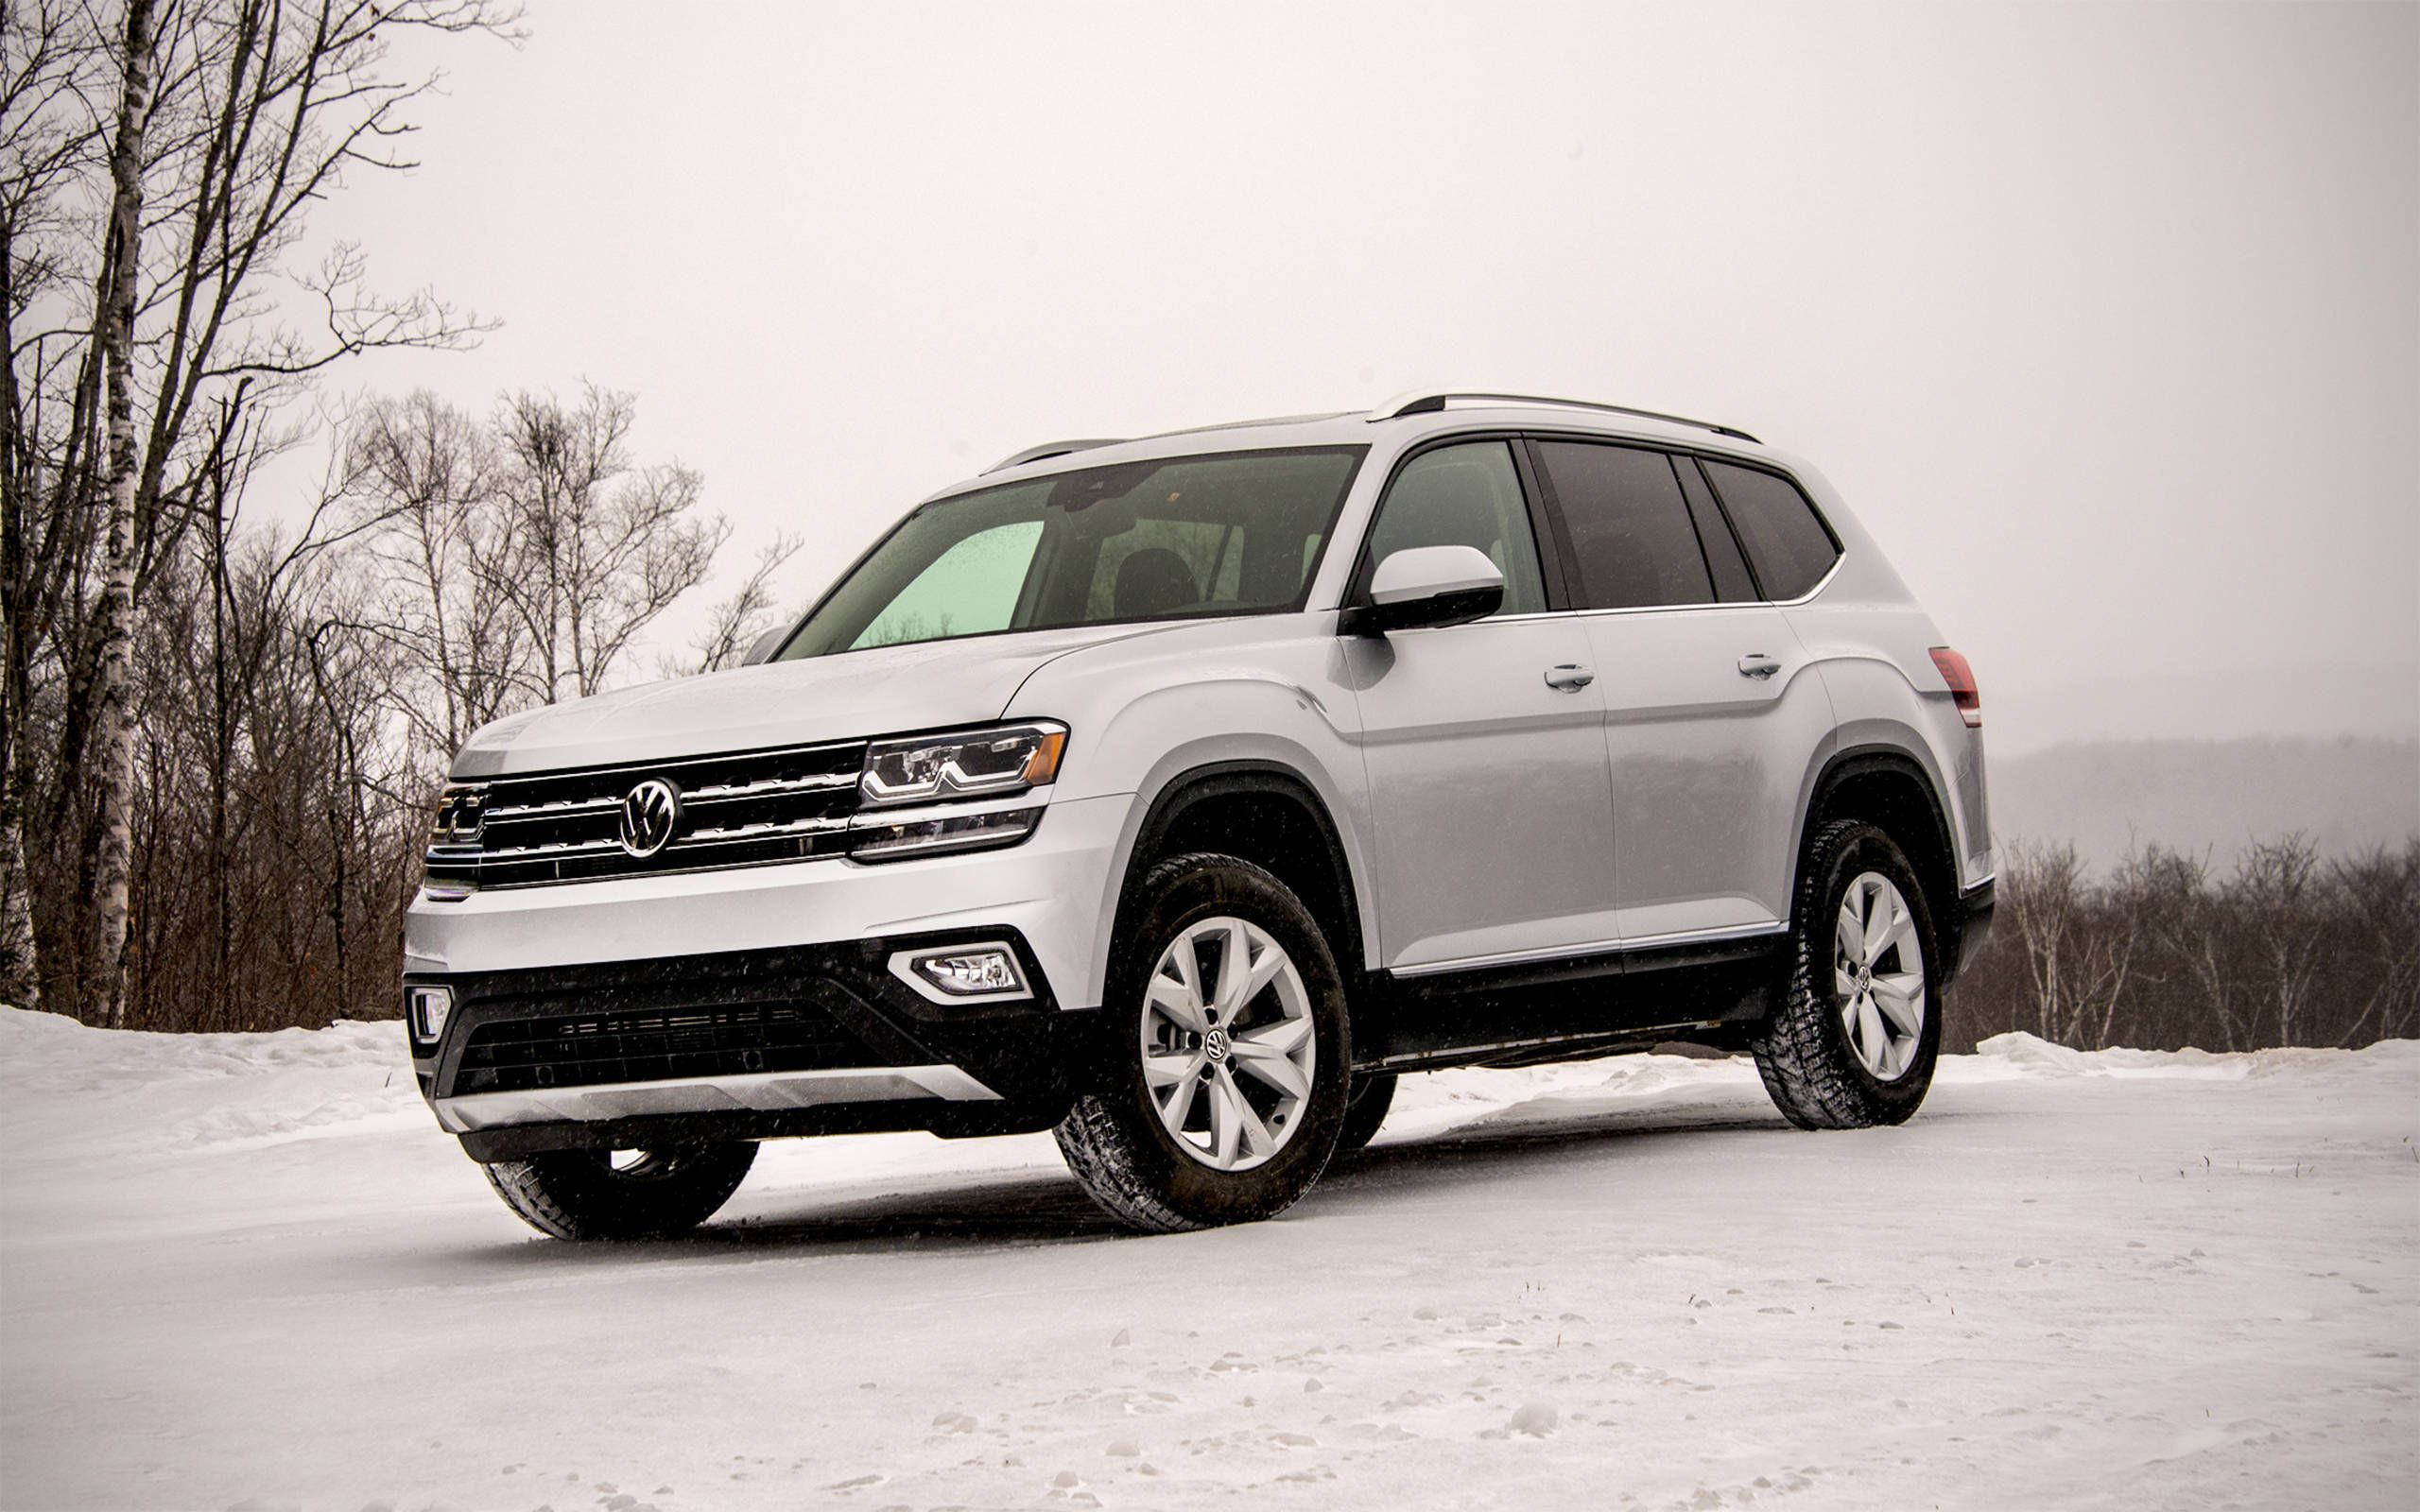 2018 Volkswagen Atlas first drive: American-style family hauler done right